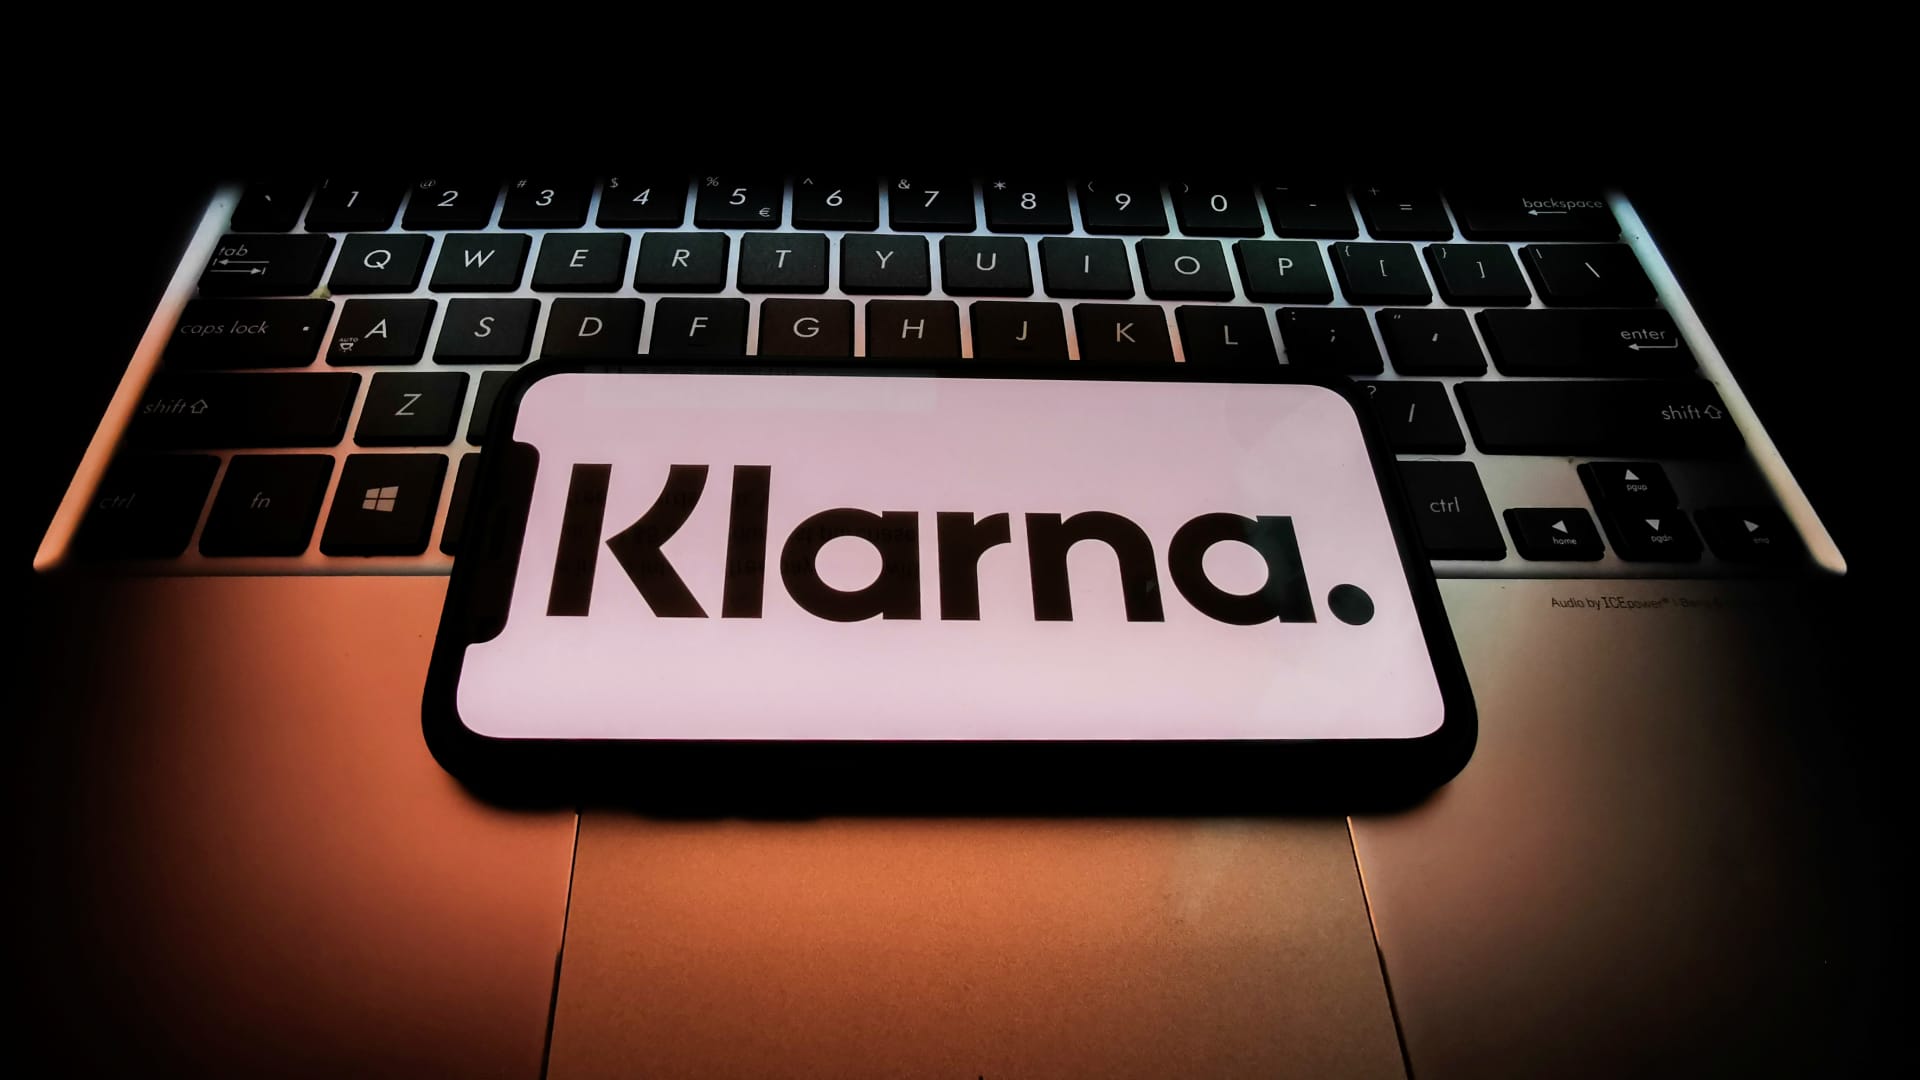 Buy now, pay later firm Klarna reduces losses by 67%, revenue up 21%